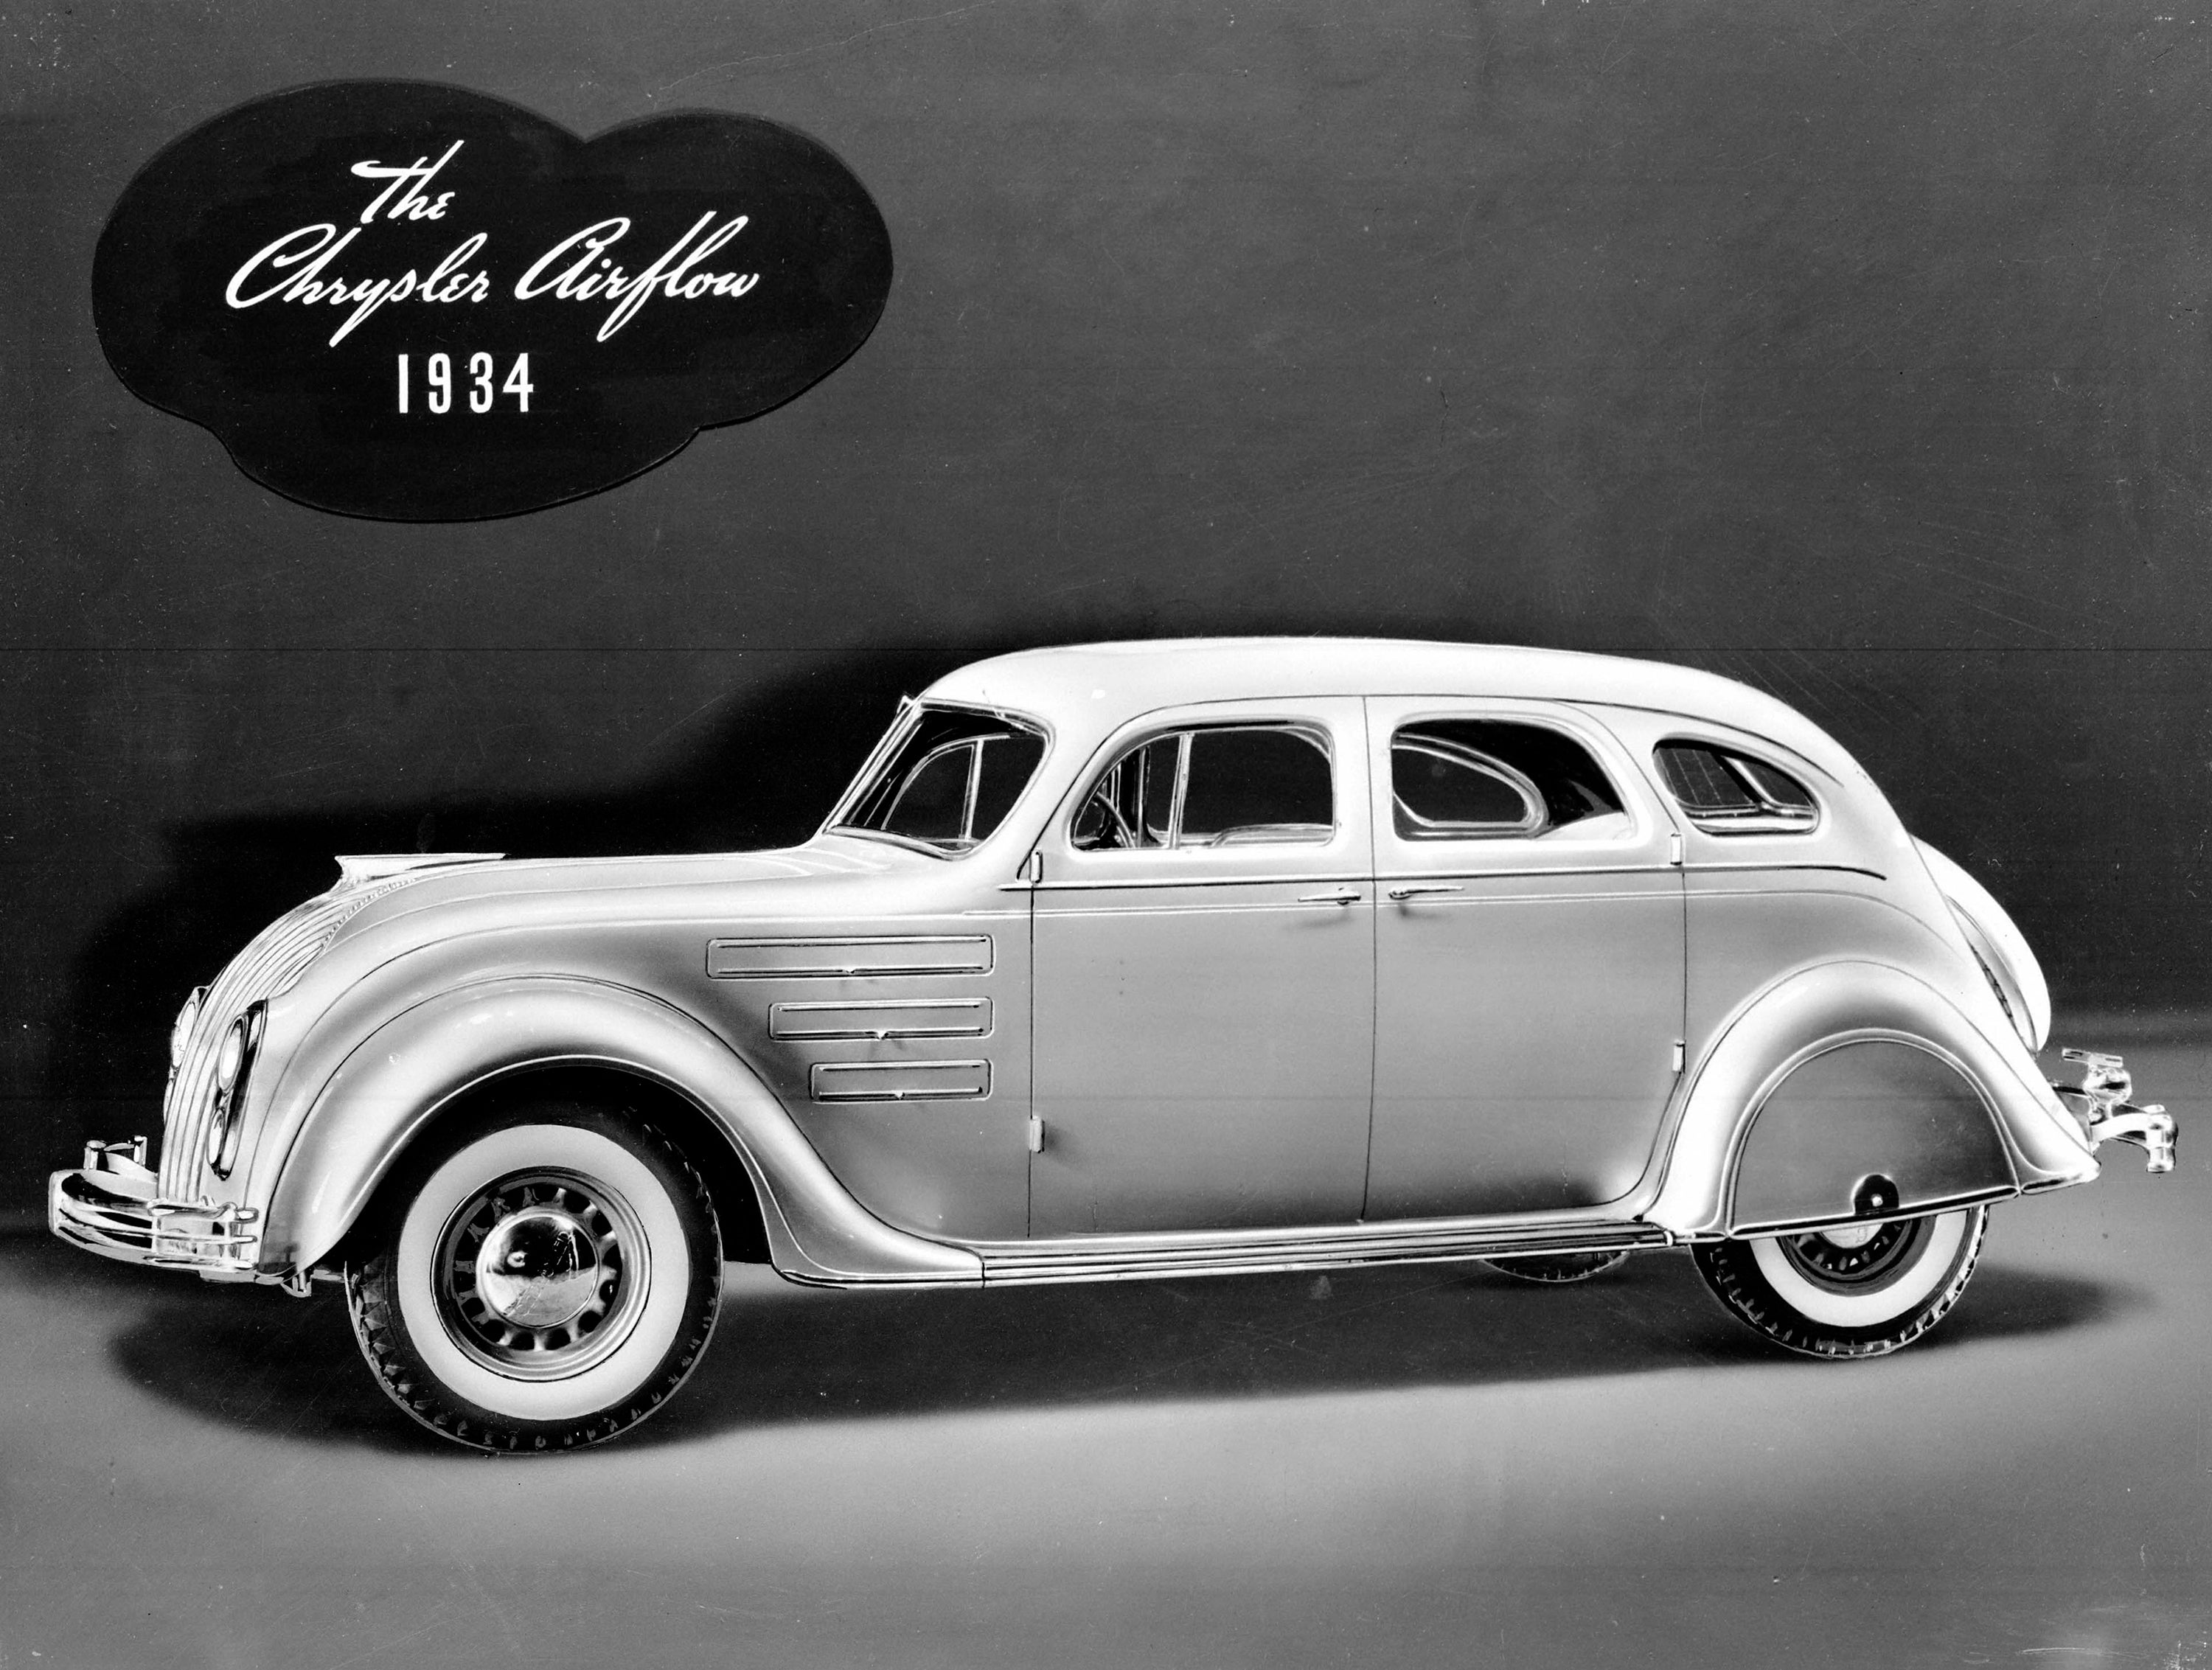 Let Jay Leno Tell You Why the 1934 Chrysler Airflow Was So ...